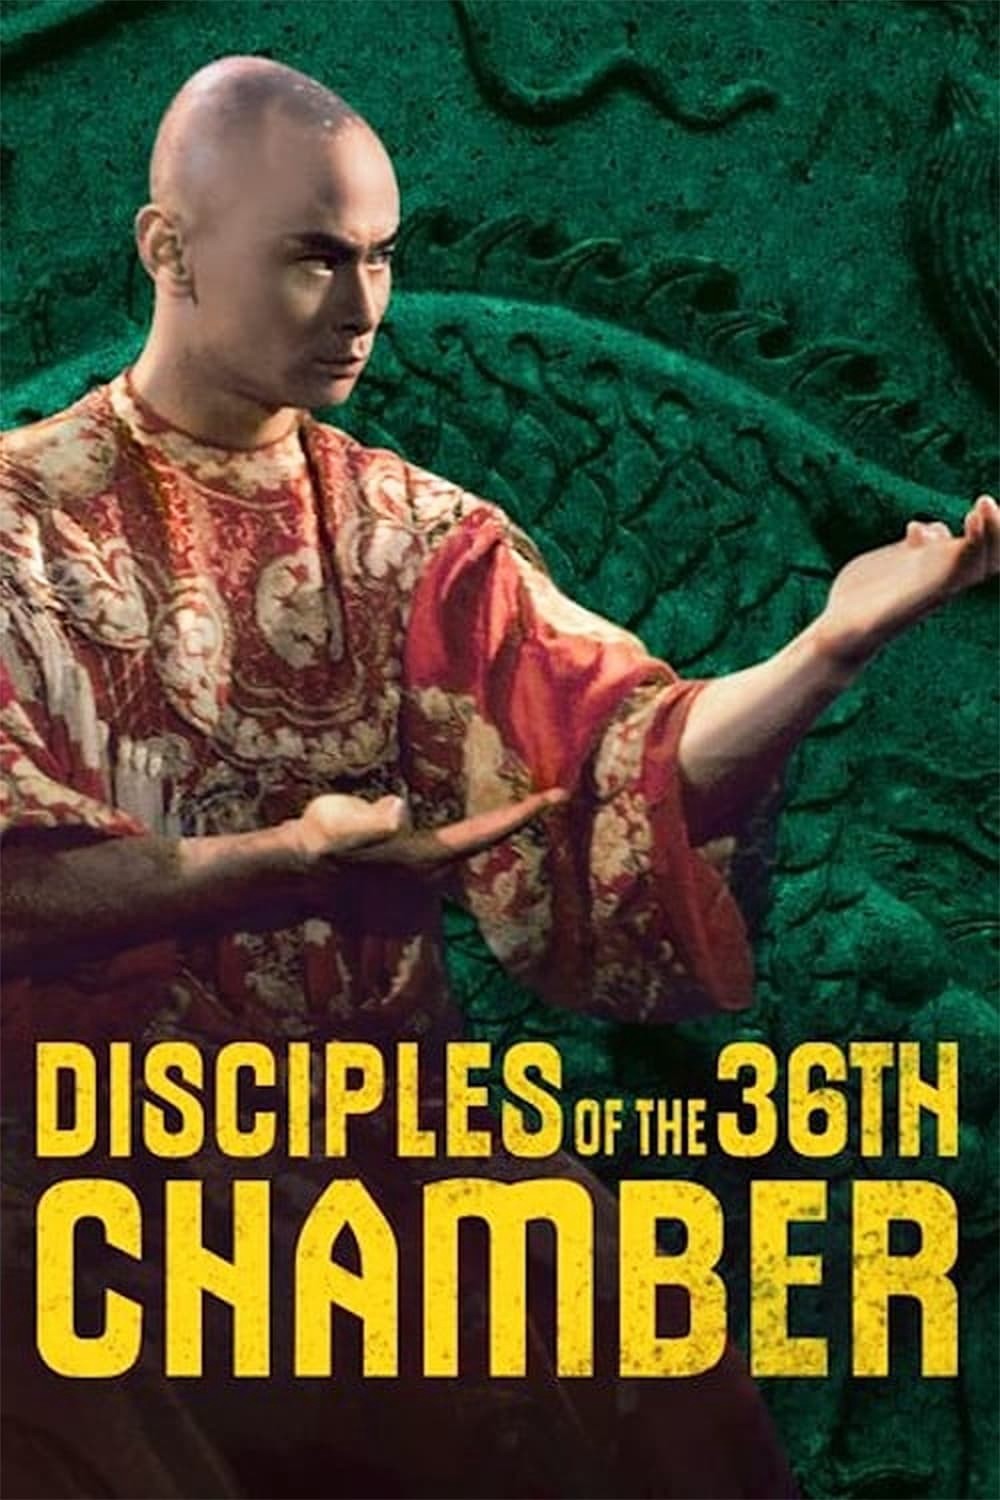 Disciples of the 36th Chamber 1985